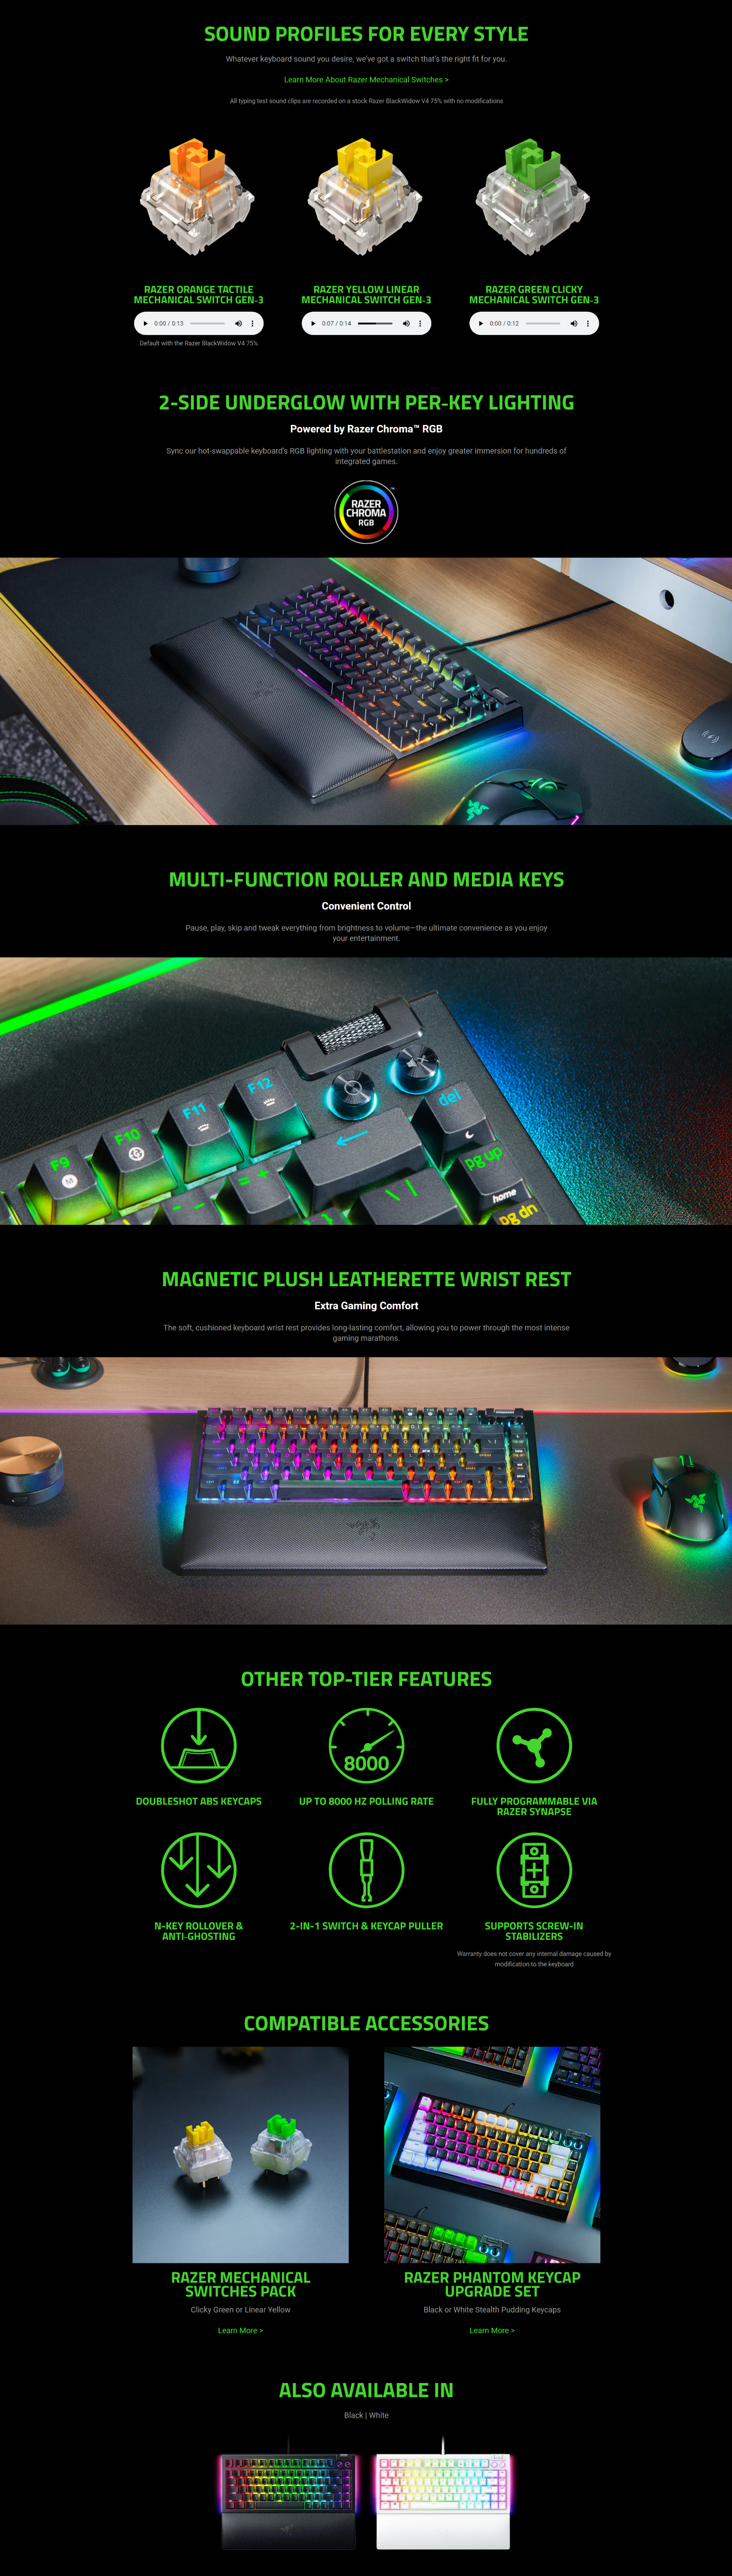 A large marketing image providing additional information about the product Razer BlackWidow V4 75% - Compact Mechanical Gaming Keyboard (Black) - Additional alt info not provided